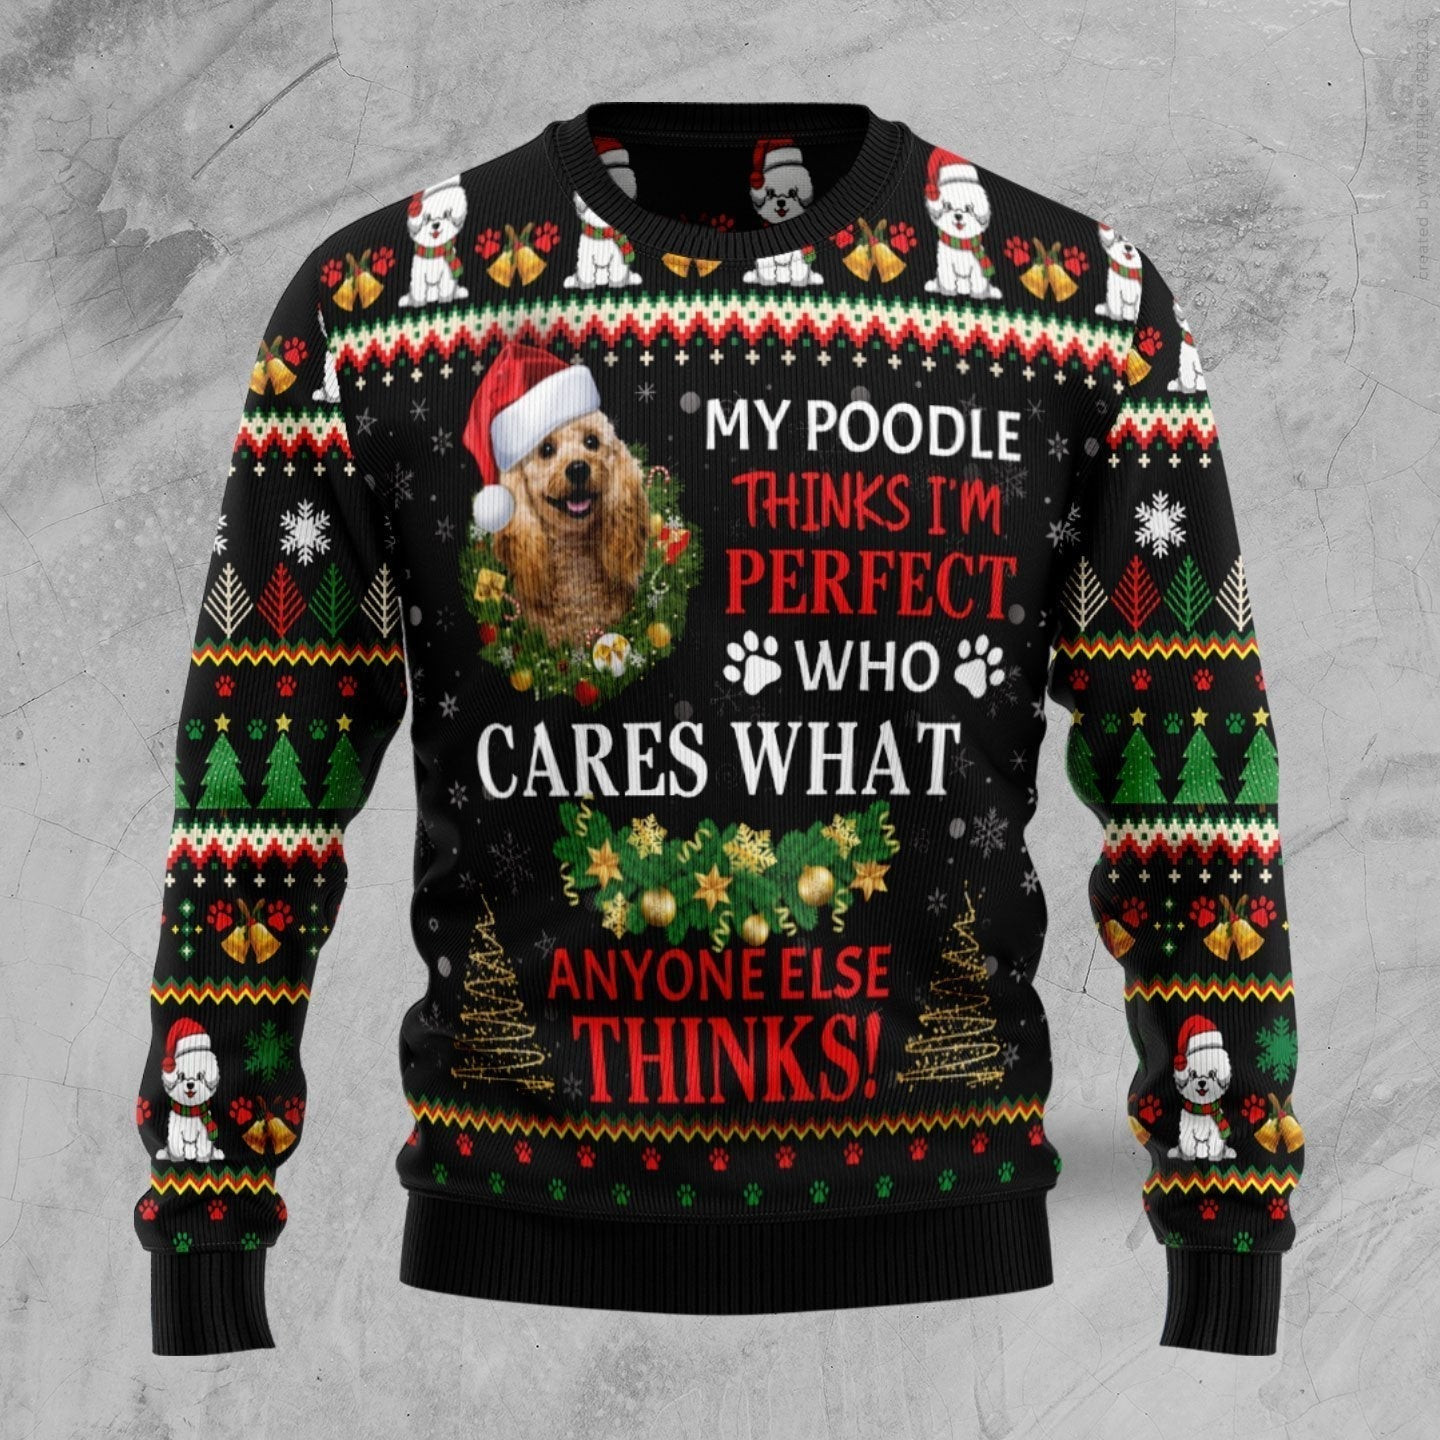 My Poodle Thinks Im Perfect Ugly Christmas Sweater Ugly Sweater For Men Women